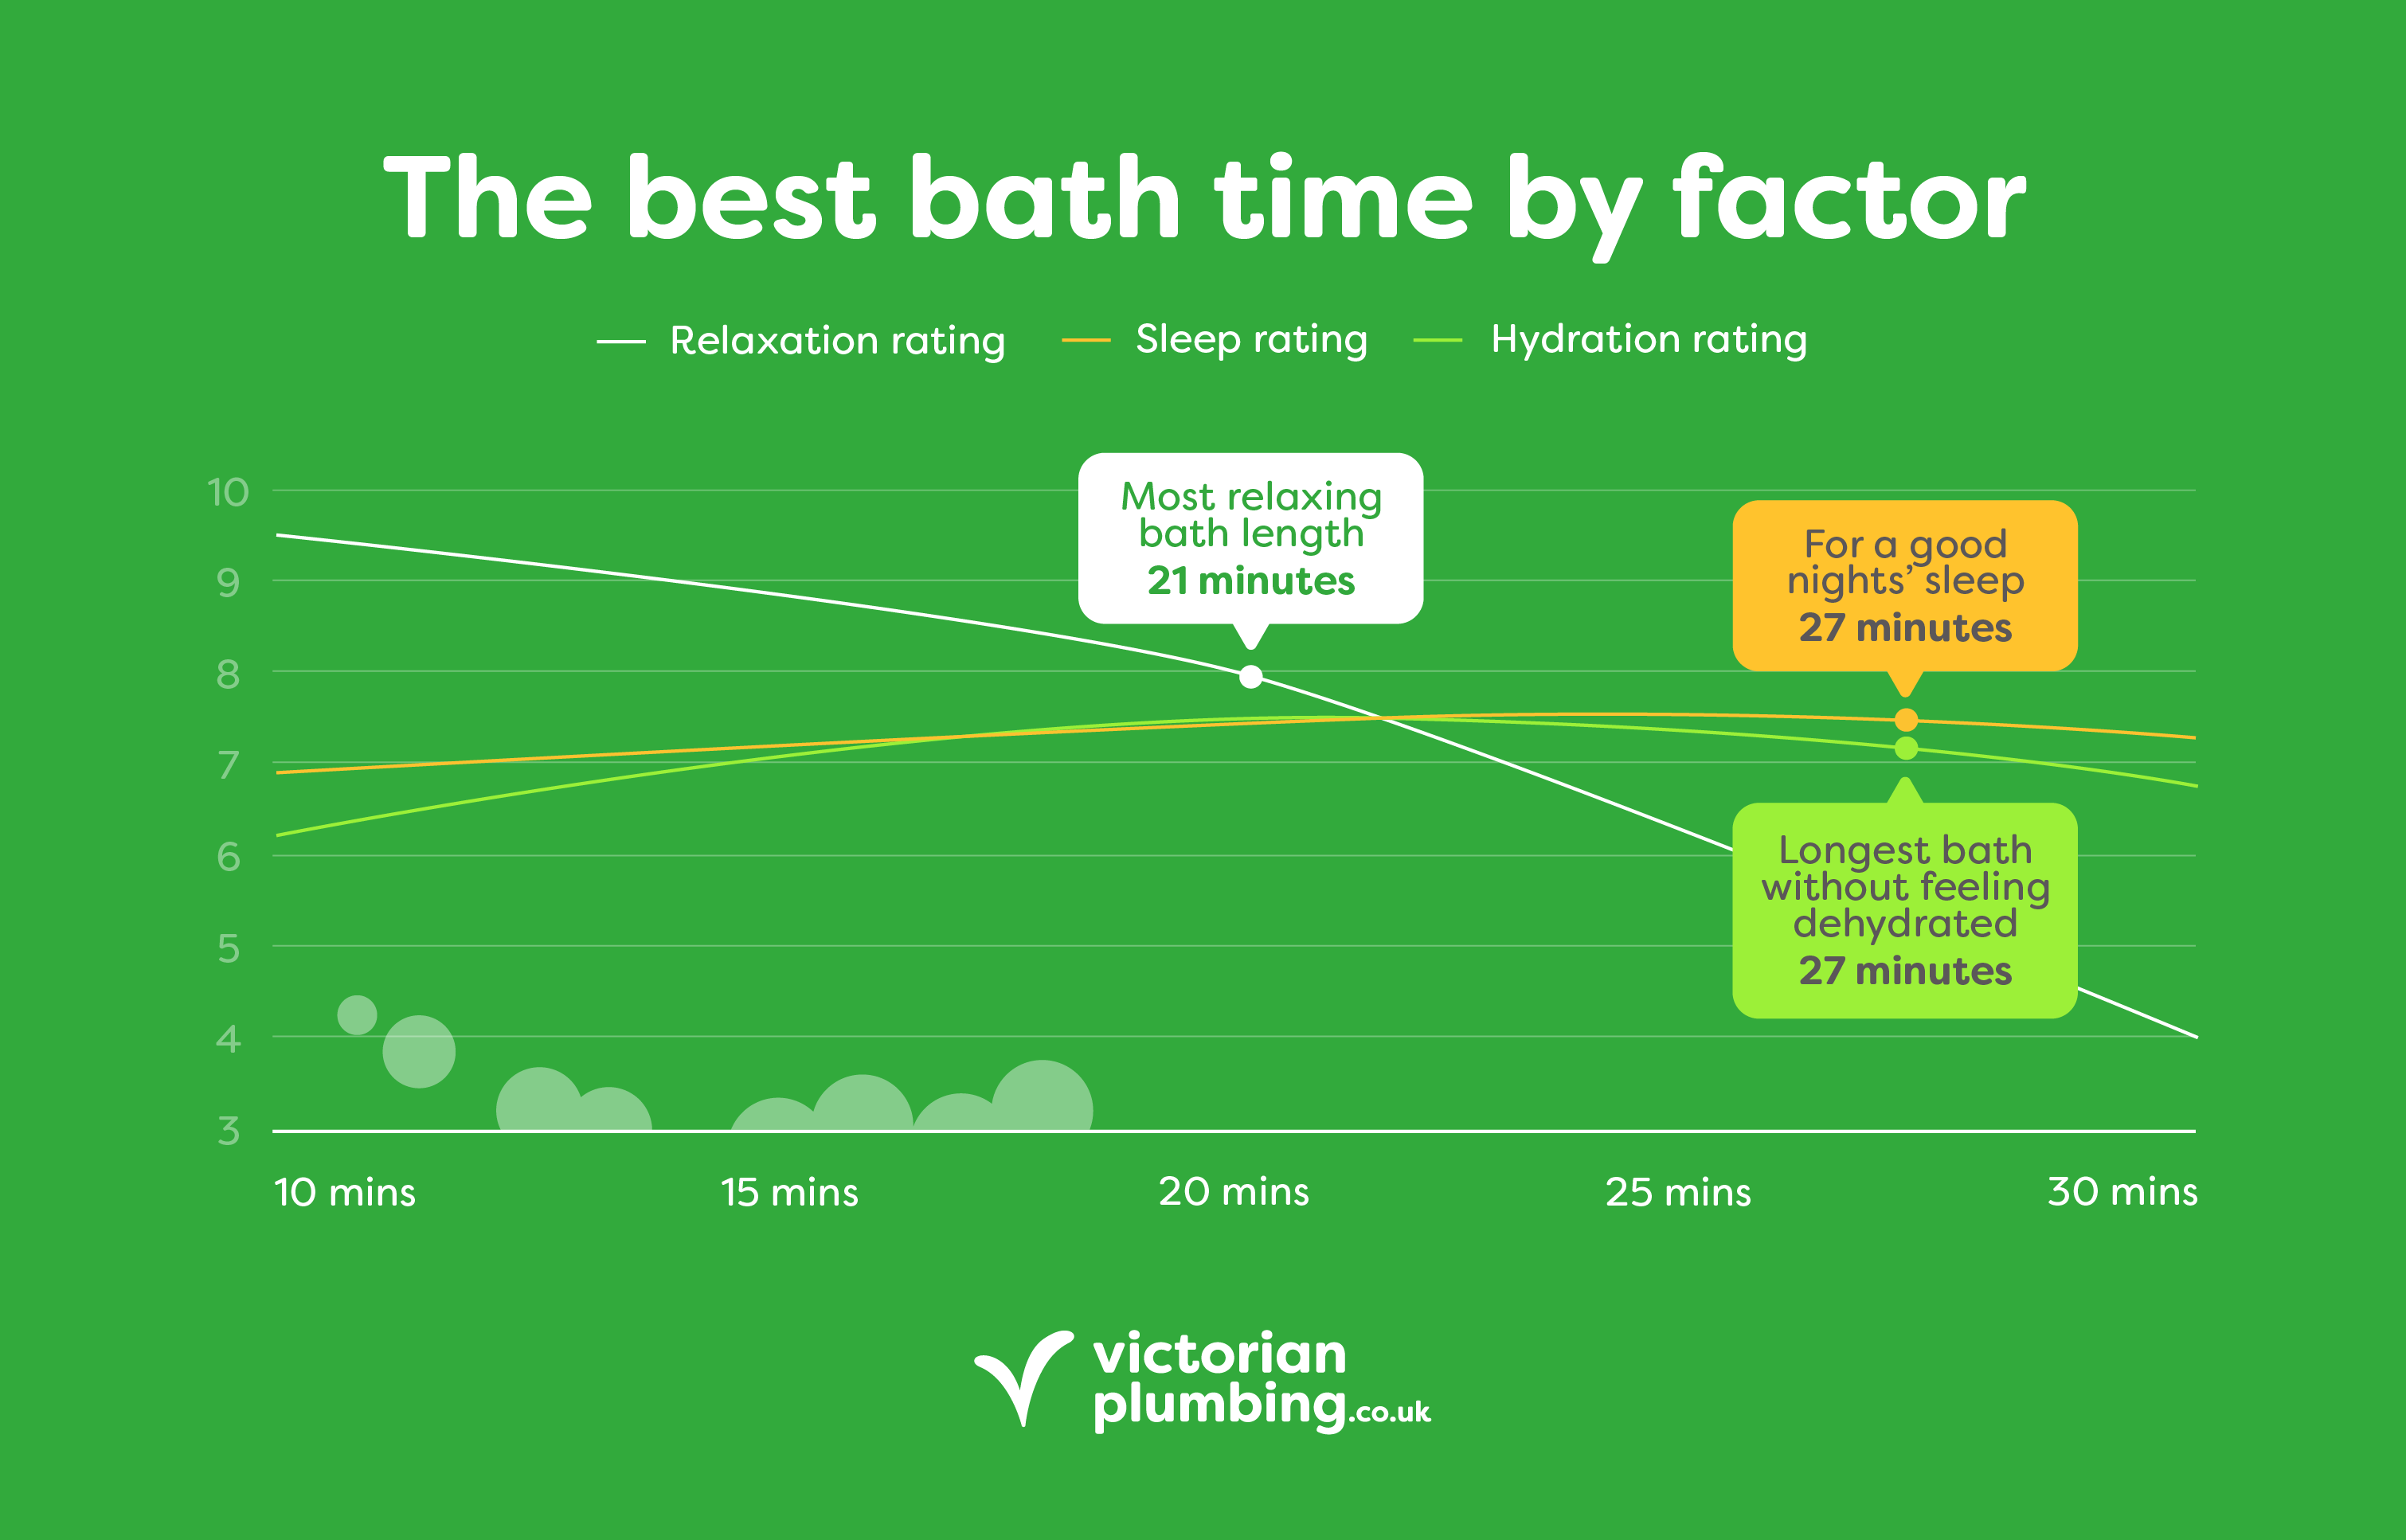 Bath time by factor